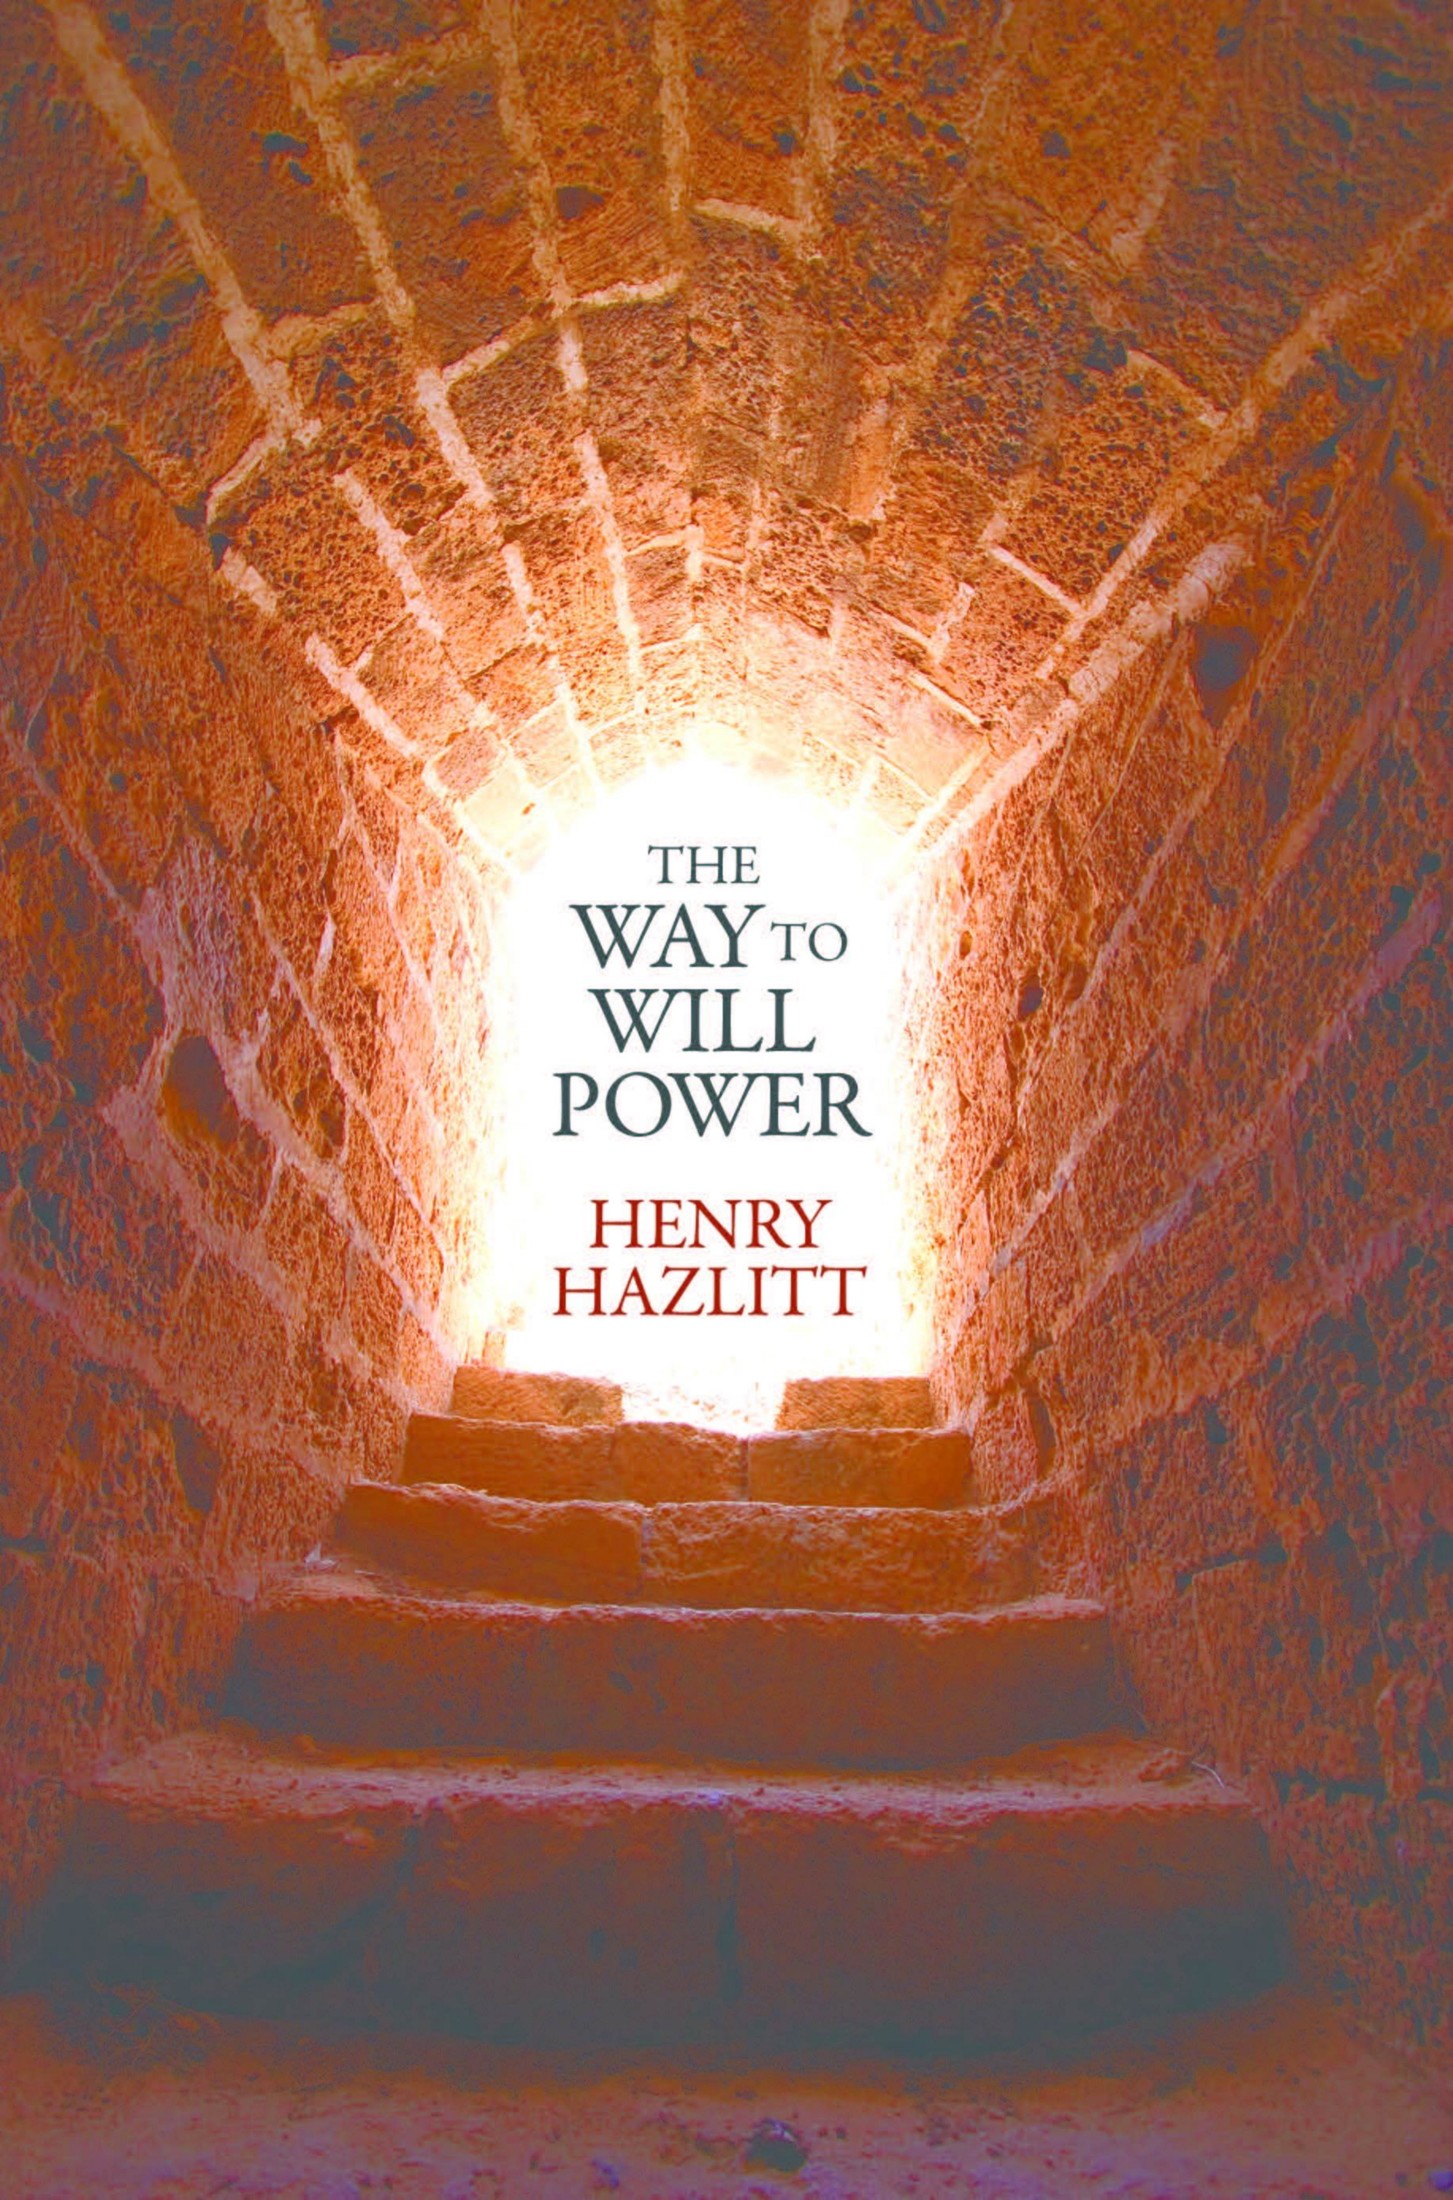 The Way To Will-Power